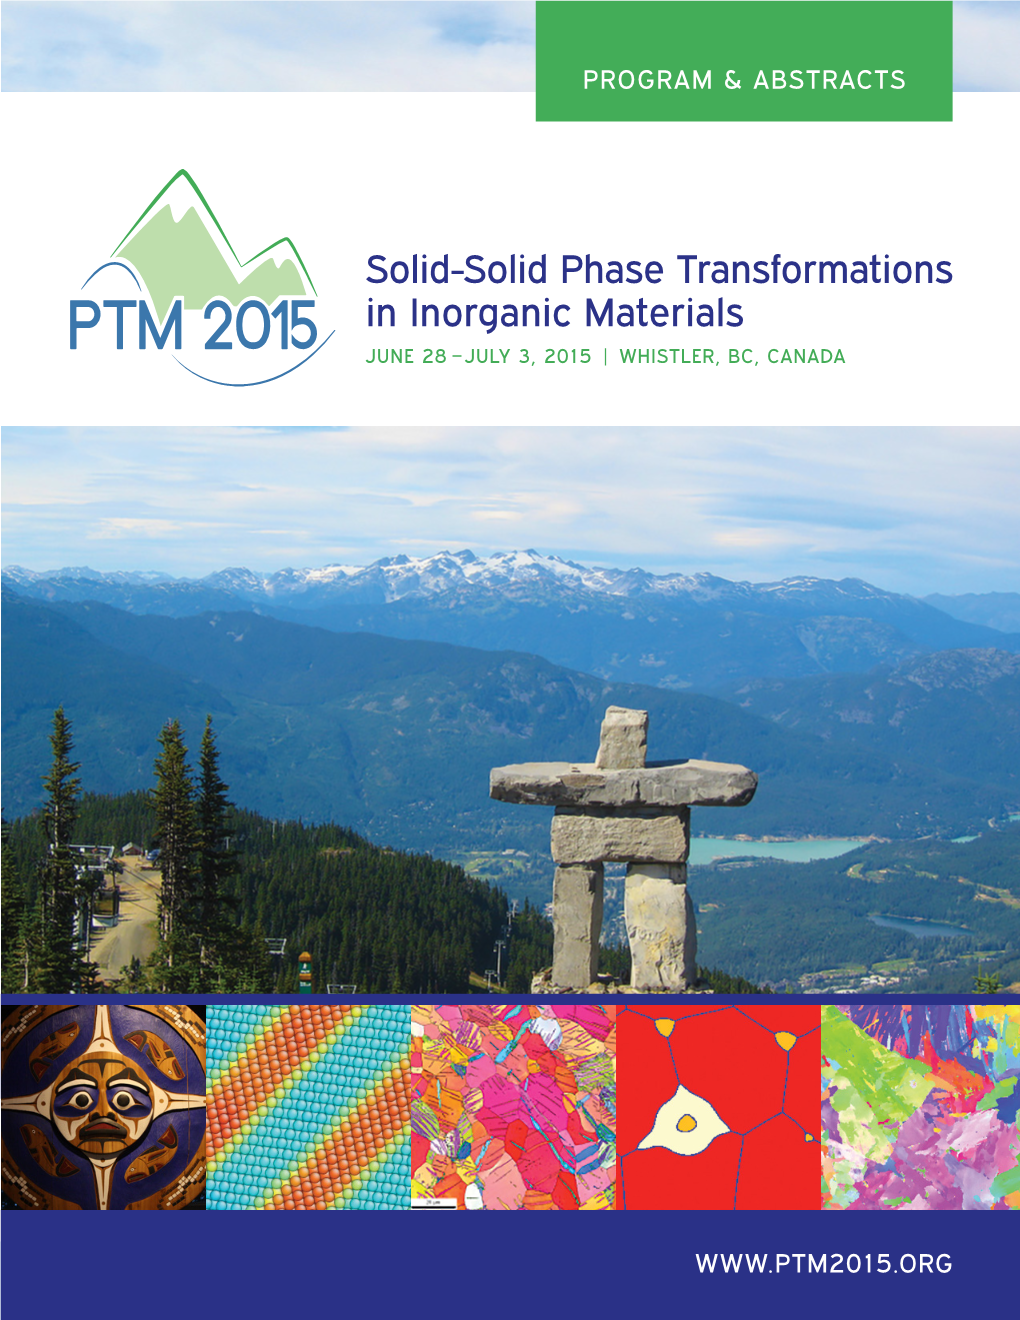 Solid-Solid Phase Transformations in Inorganic Materials JUNE 28 – JULY 3, 2015 | WHISTLER, BC, CANADA